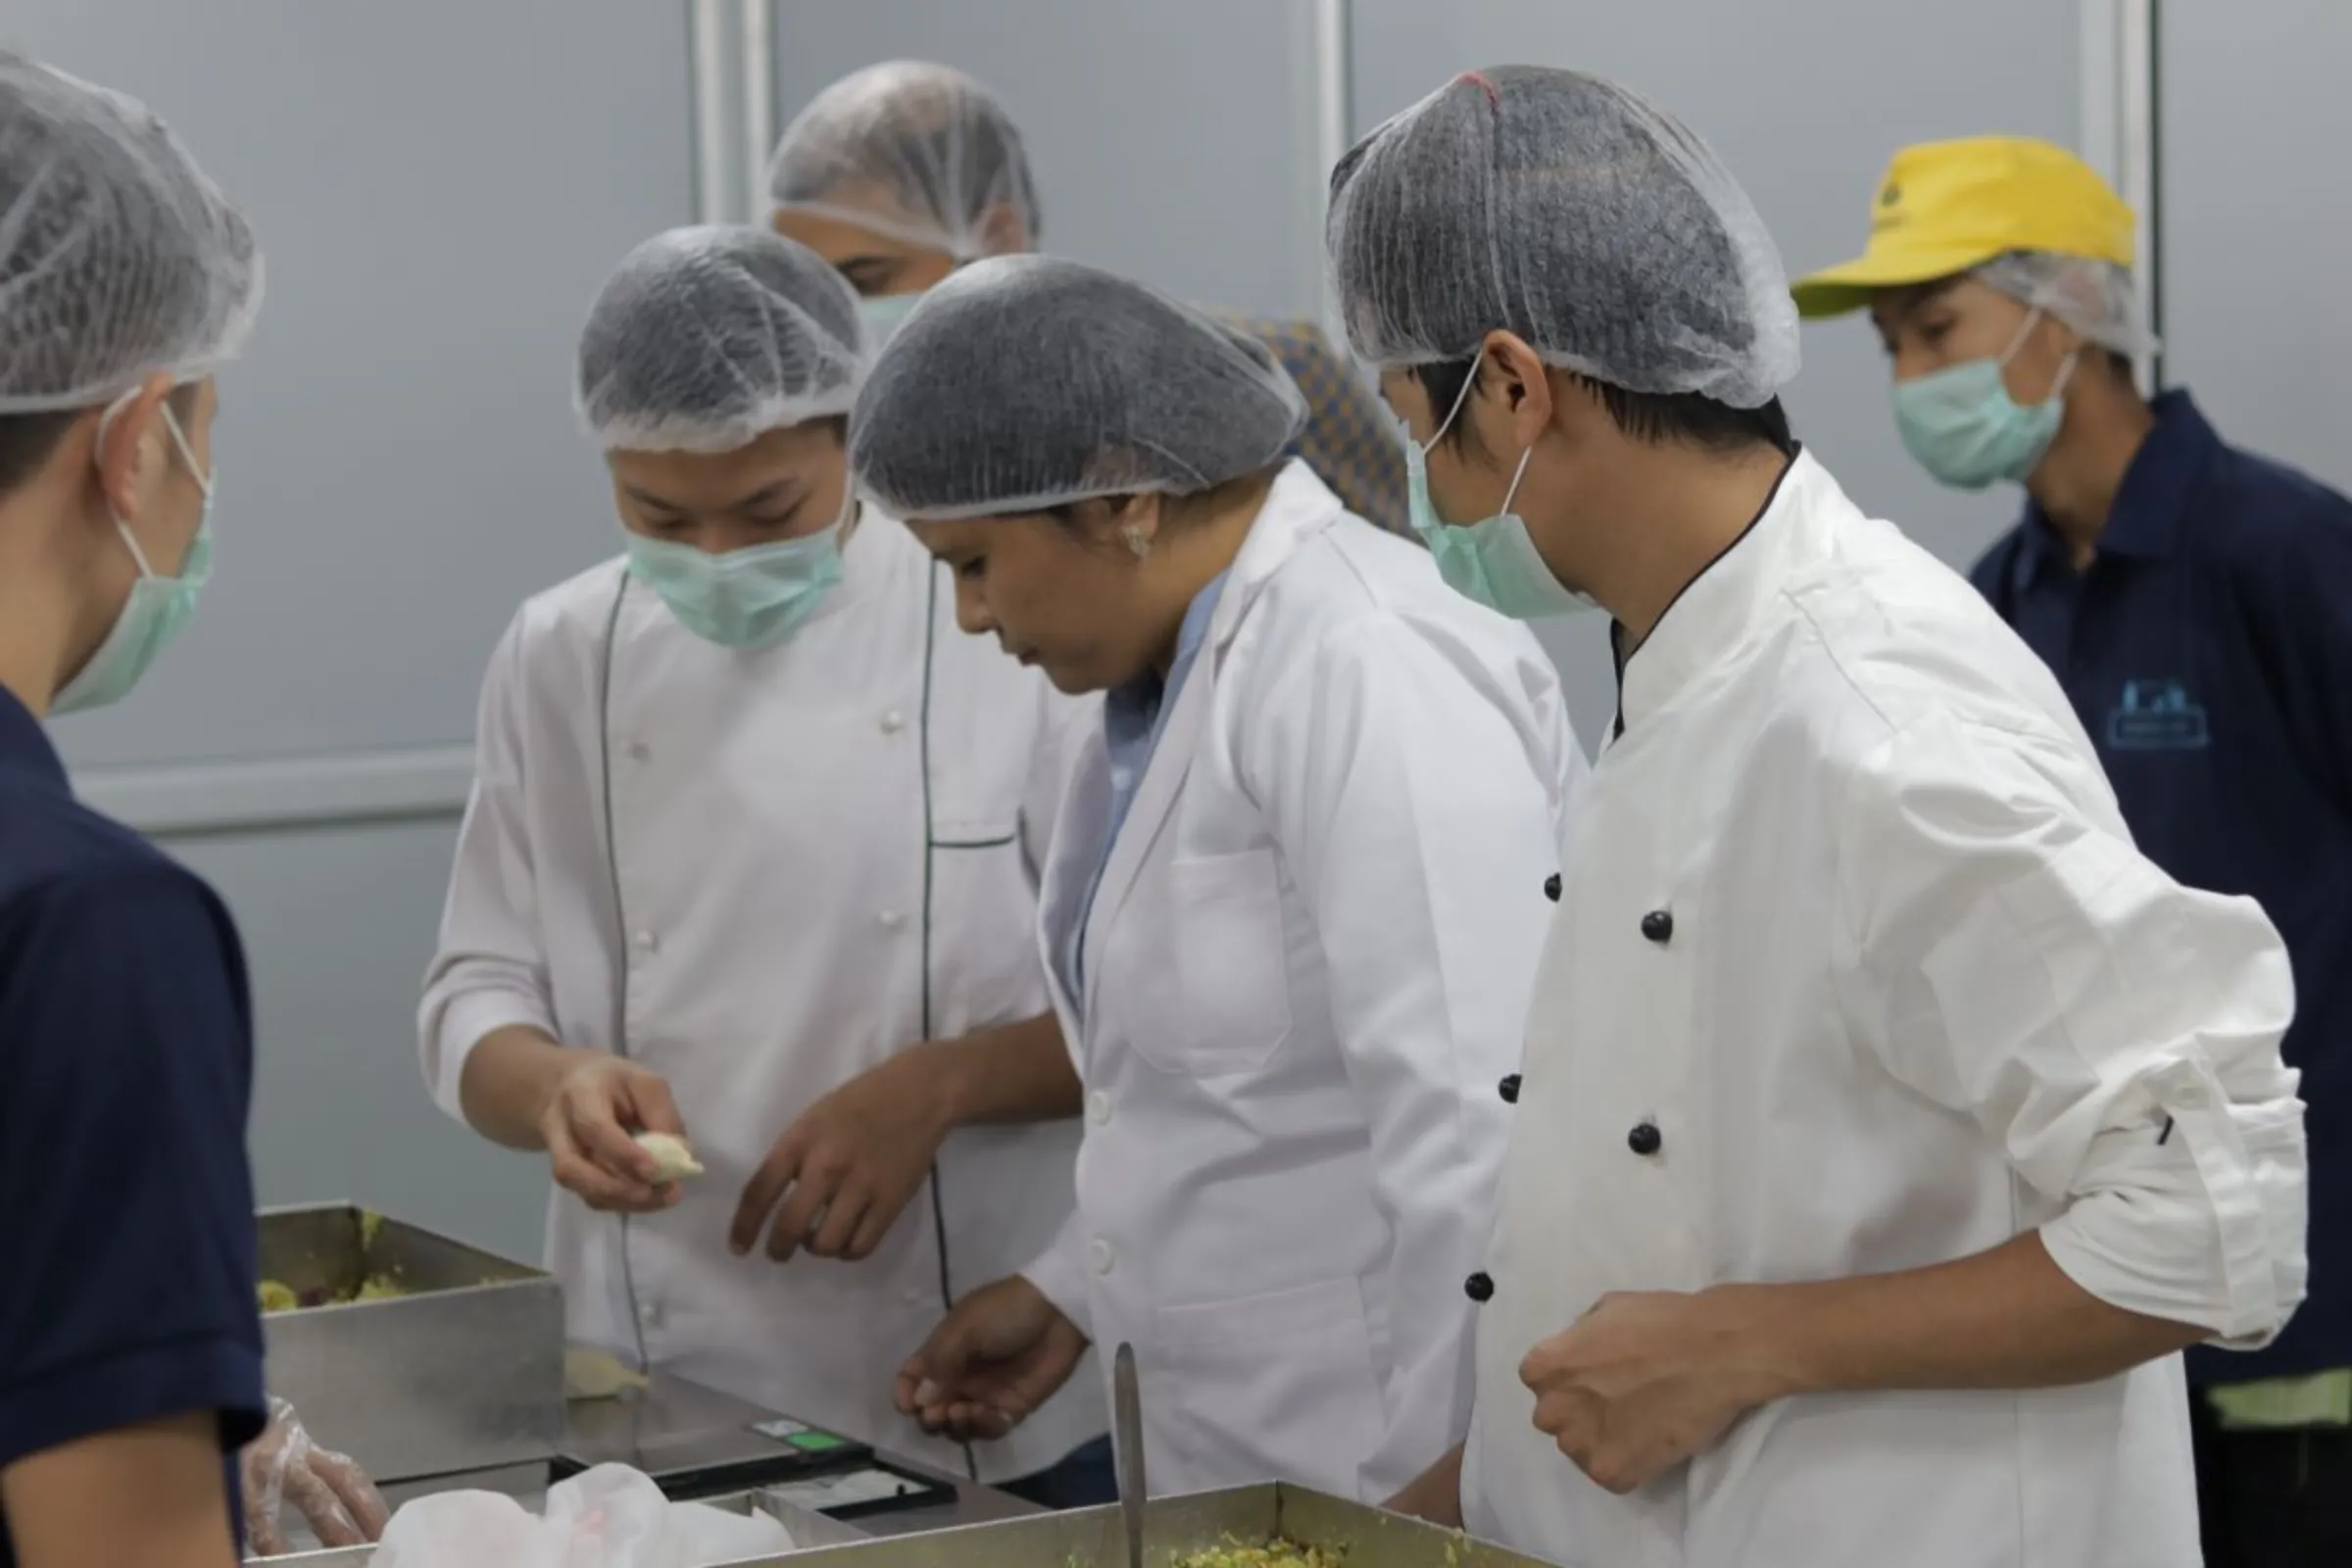 Aditi Madan (centre), co-founder of BluePine Foods, at a production unit with her staff and craftsmen discussing weightage of their products, momos. Aditi Madan/Handout via Thomson Reuters Foundation